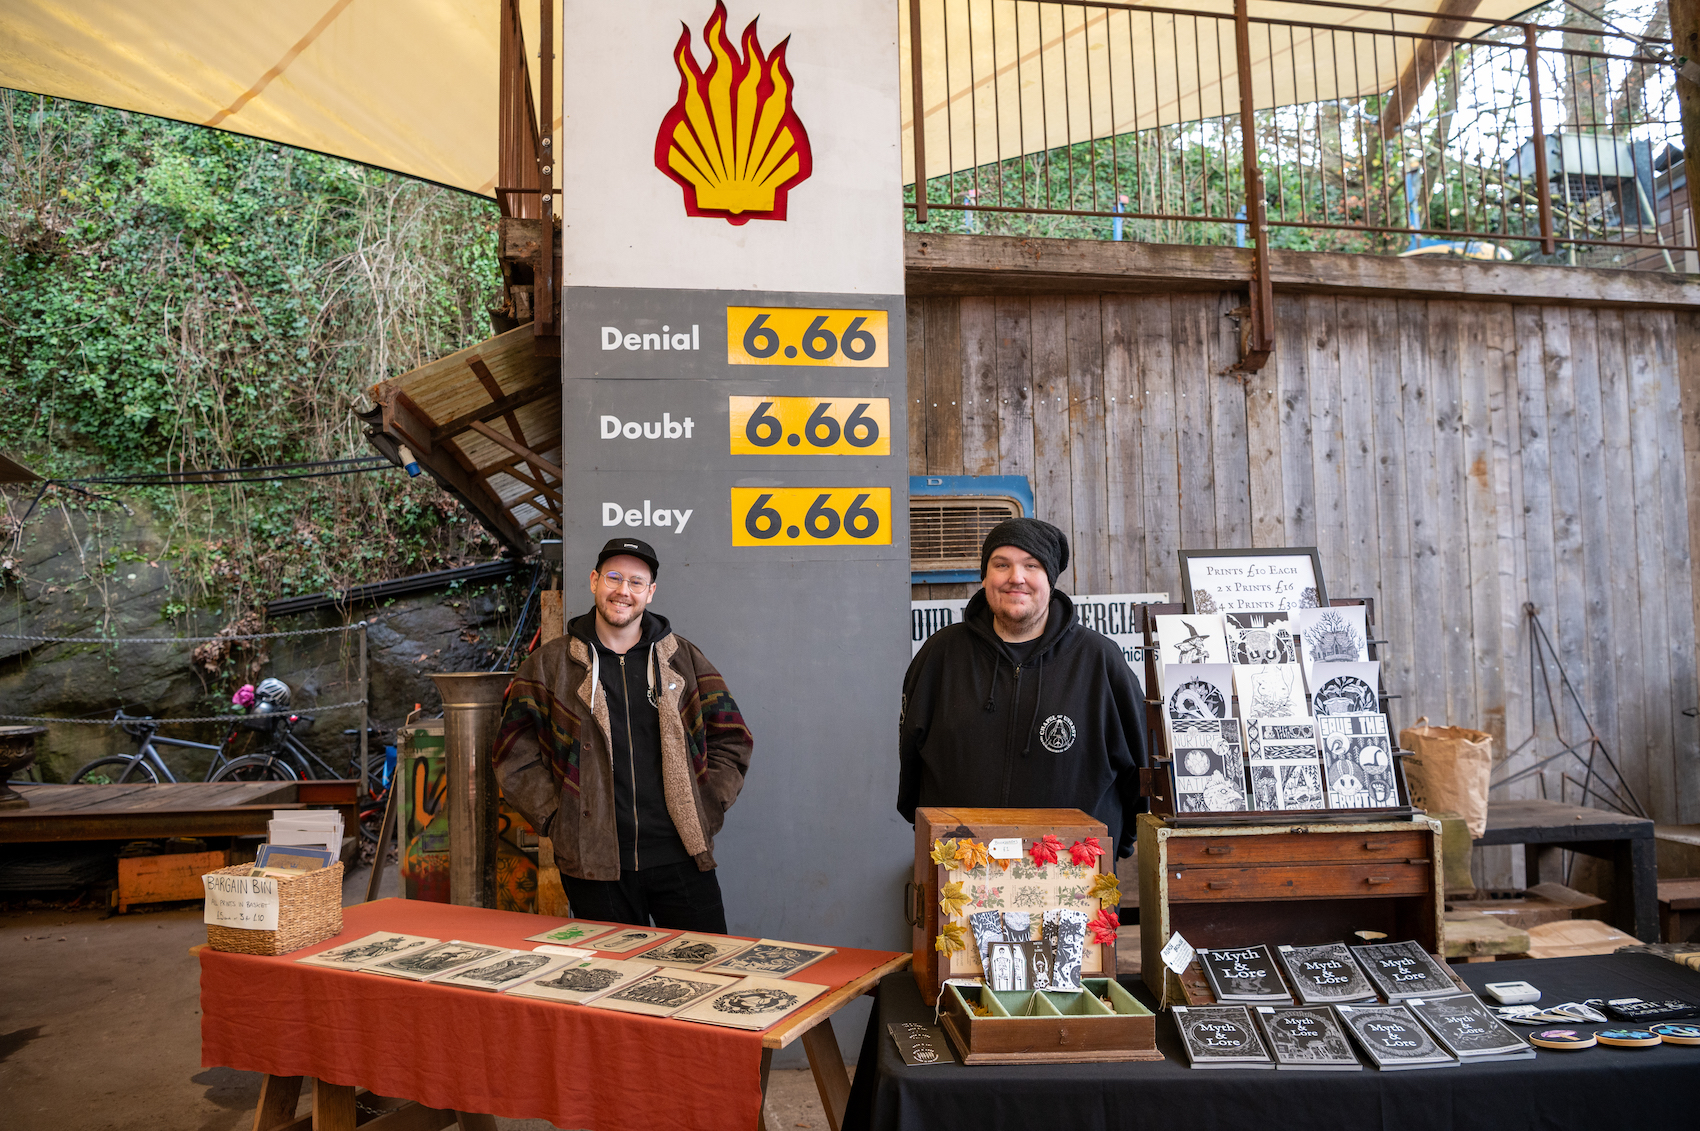 Two men stand at a stall selling zines, behind them is a large sign satirising petrol stations.